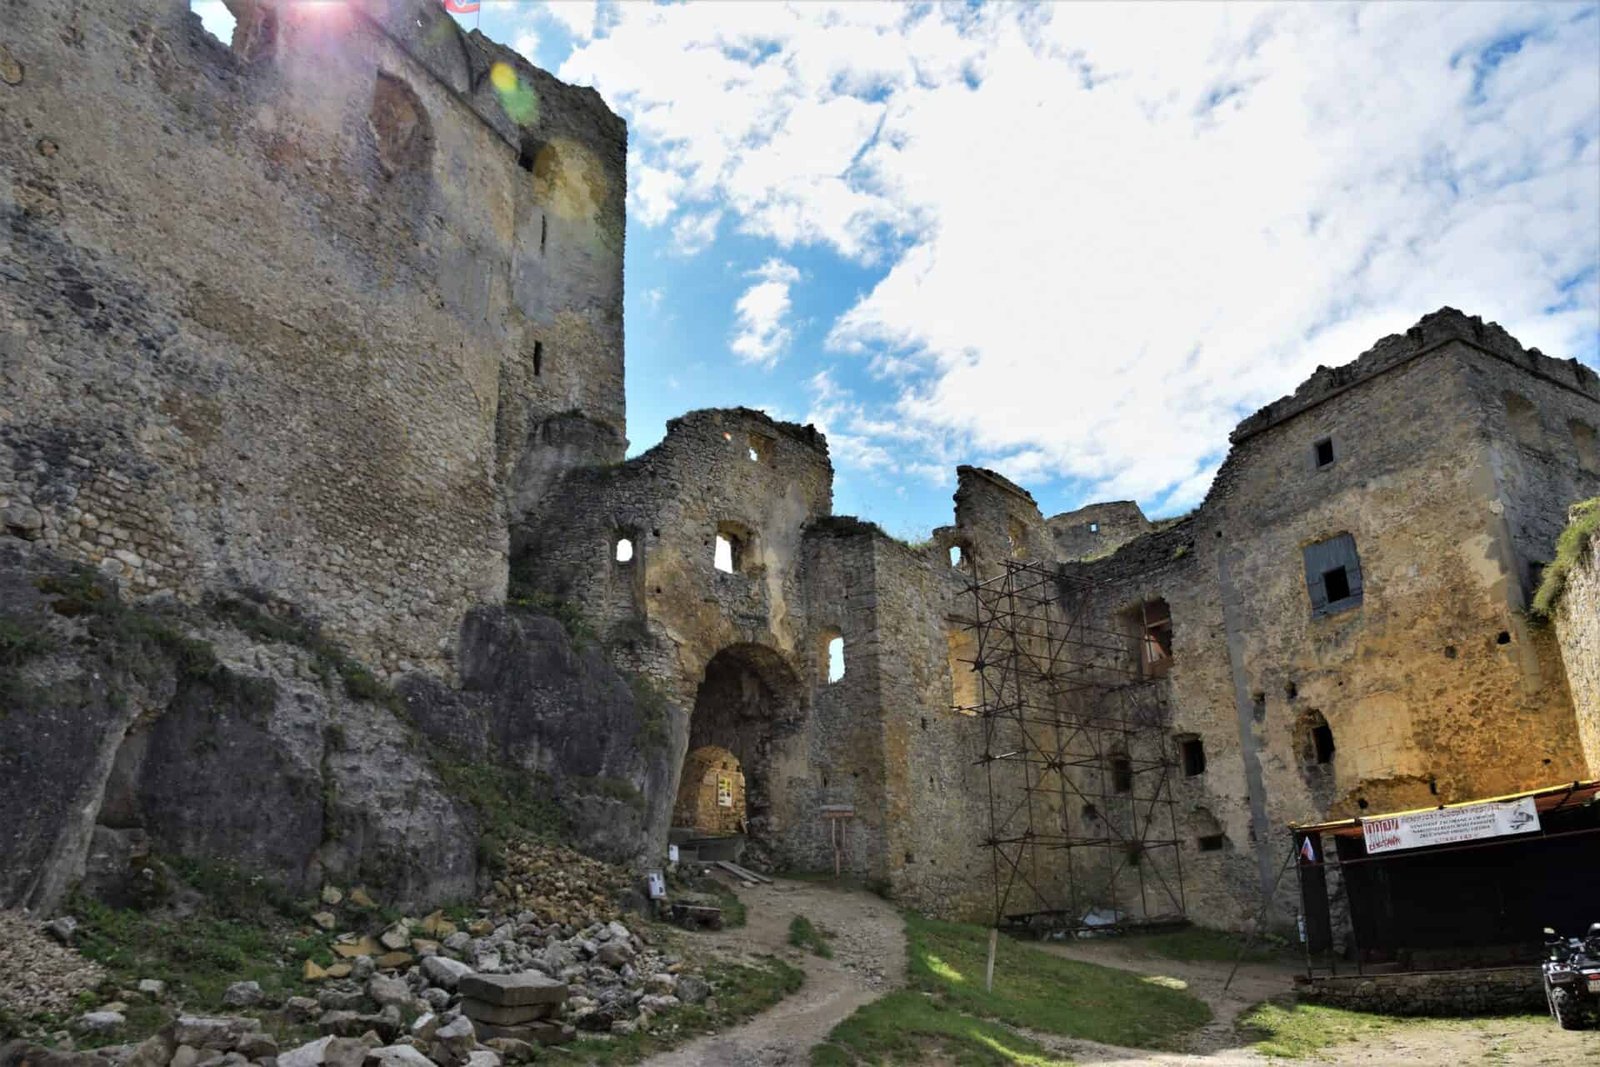 main courtyard of Lietava Castle encircled by high walls of the living quarters; a gate in the middle leads into the castle; there is a small stage in the lower right corner; Slovakia